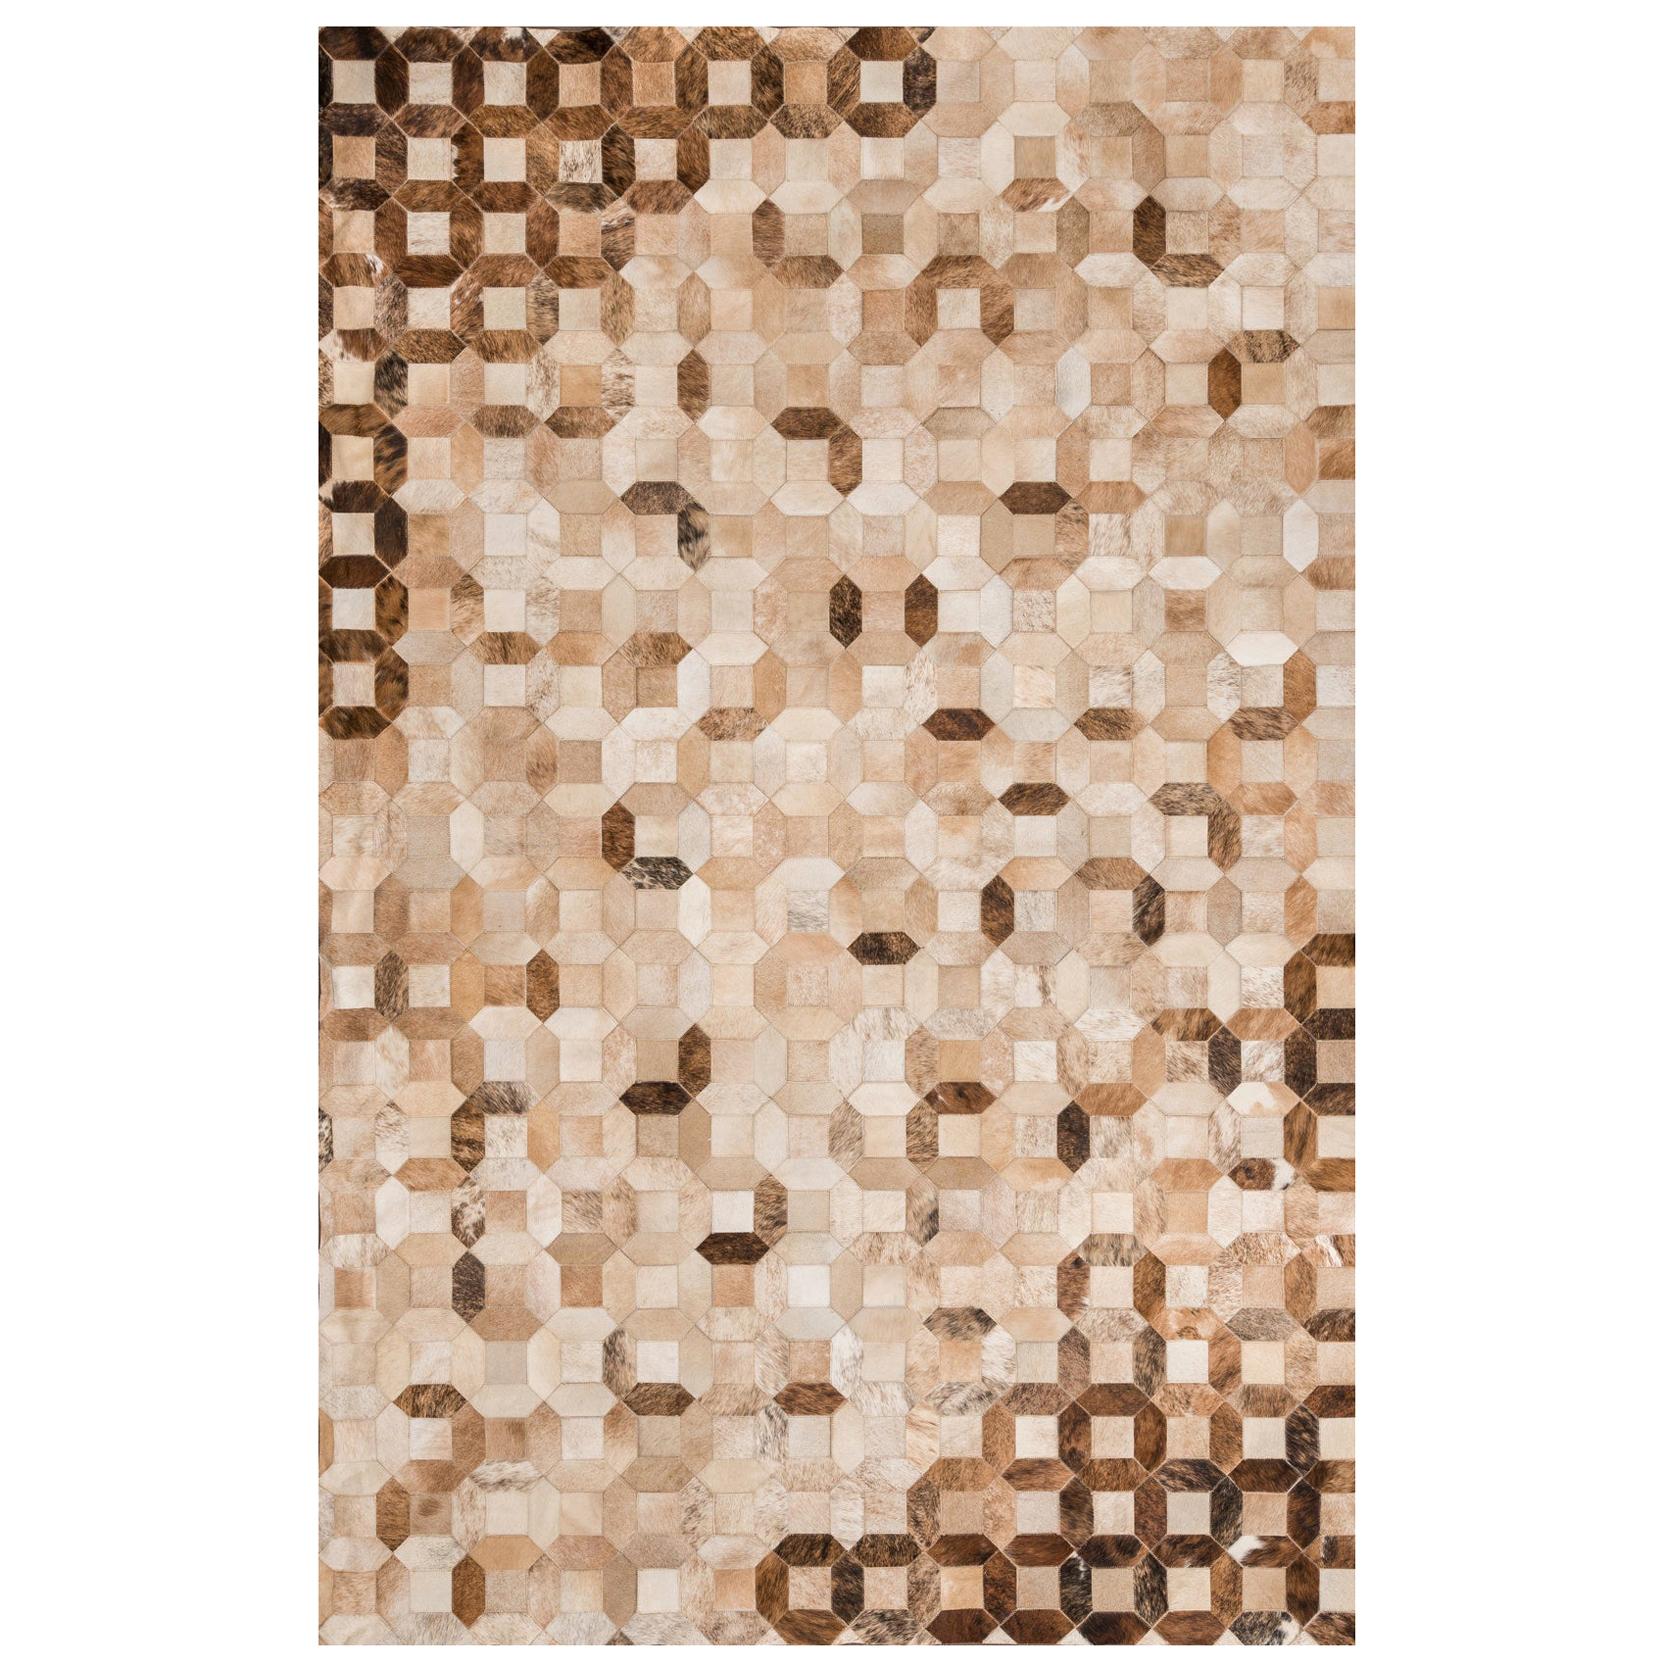 Natural Caramel Color Graphic Patterned Cowhide Area Floor Rug Small